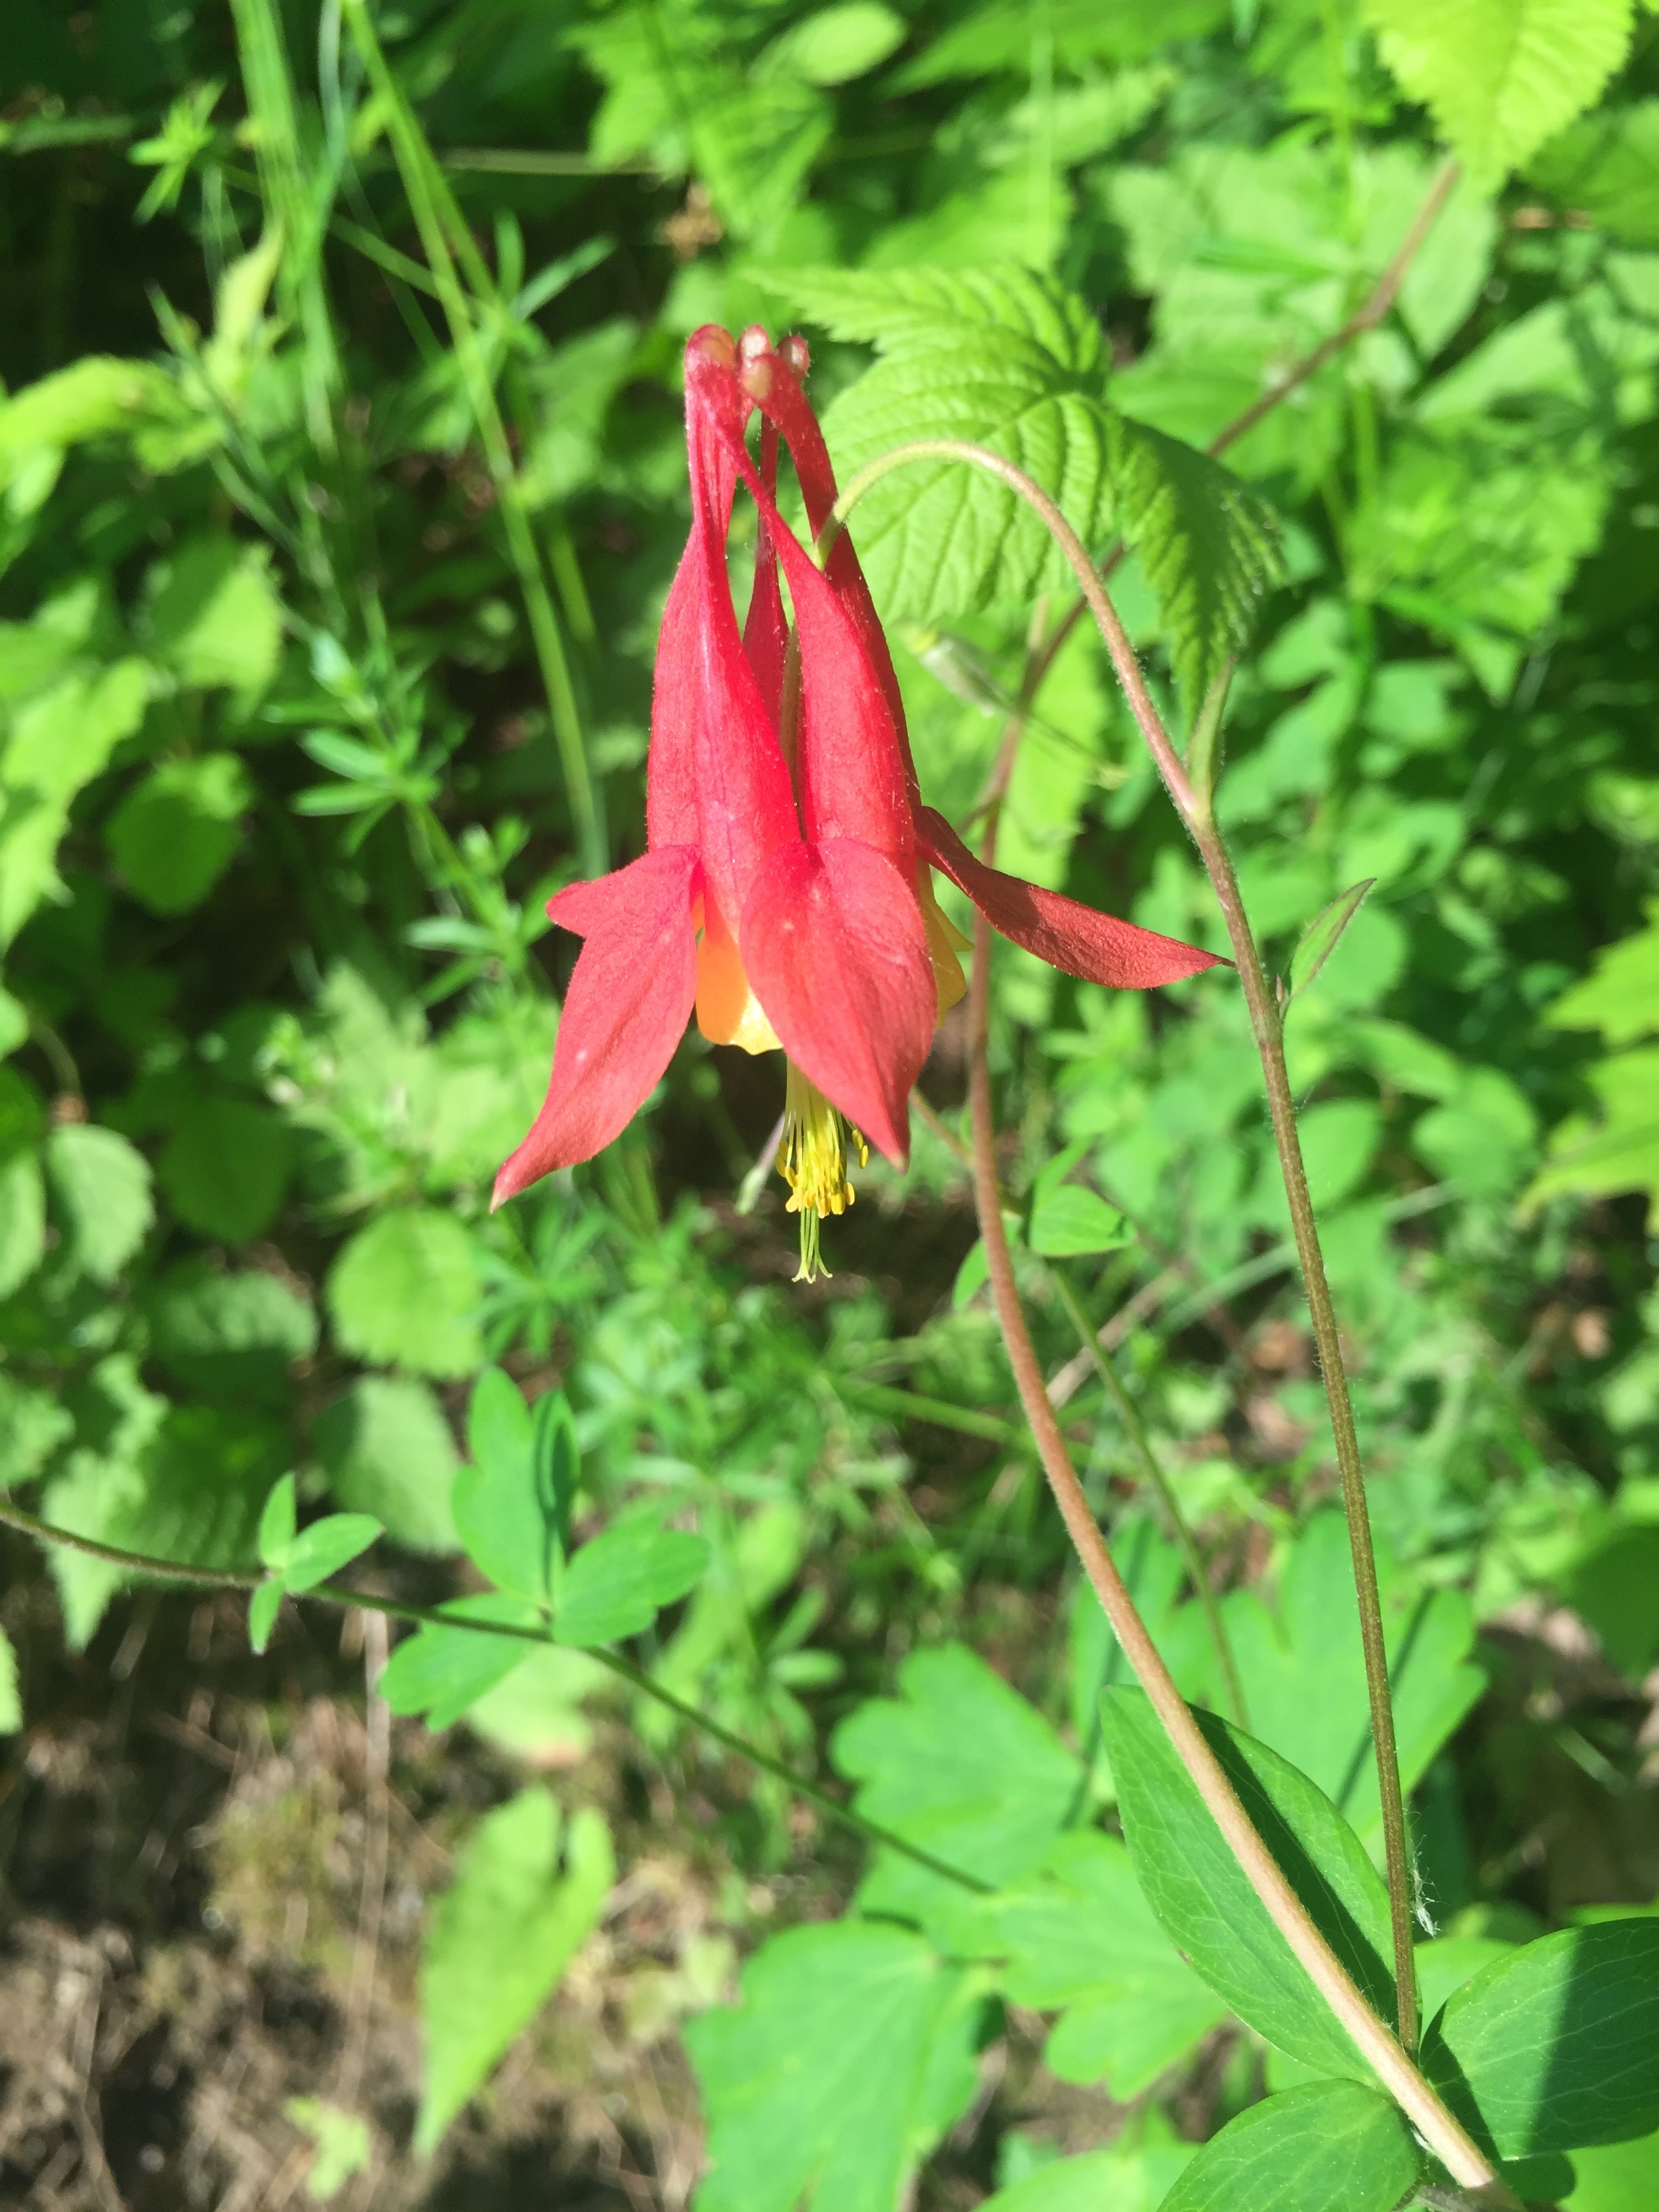  The wild red columbine poking up from ditches on the side of the road get me every year. Such defiant beauty; we could all learn something from these flowers. 